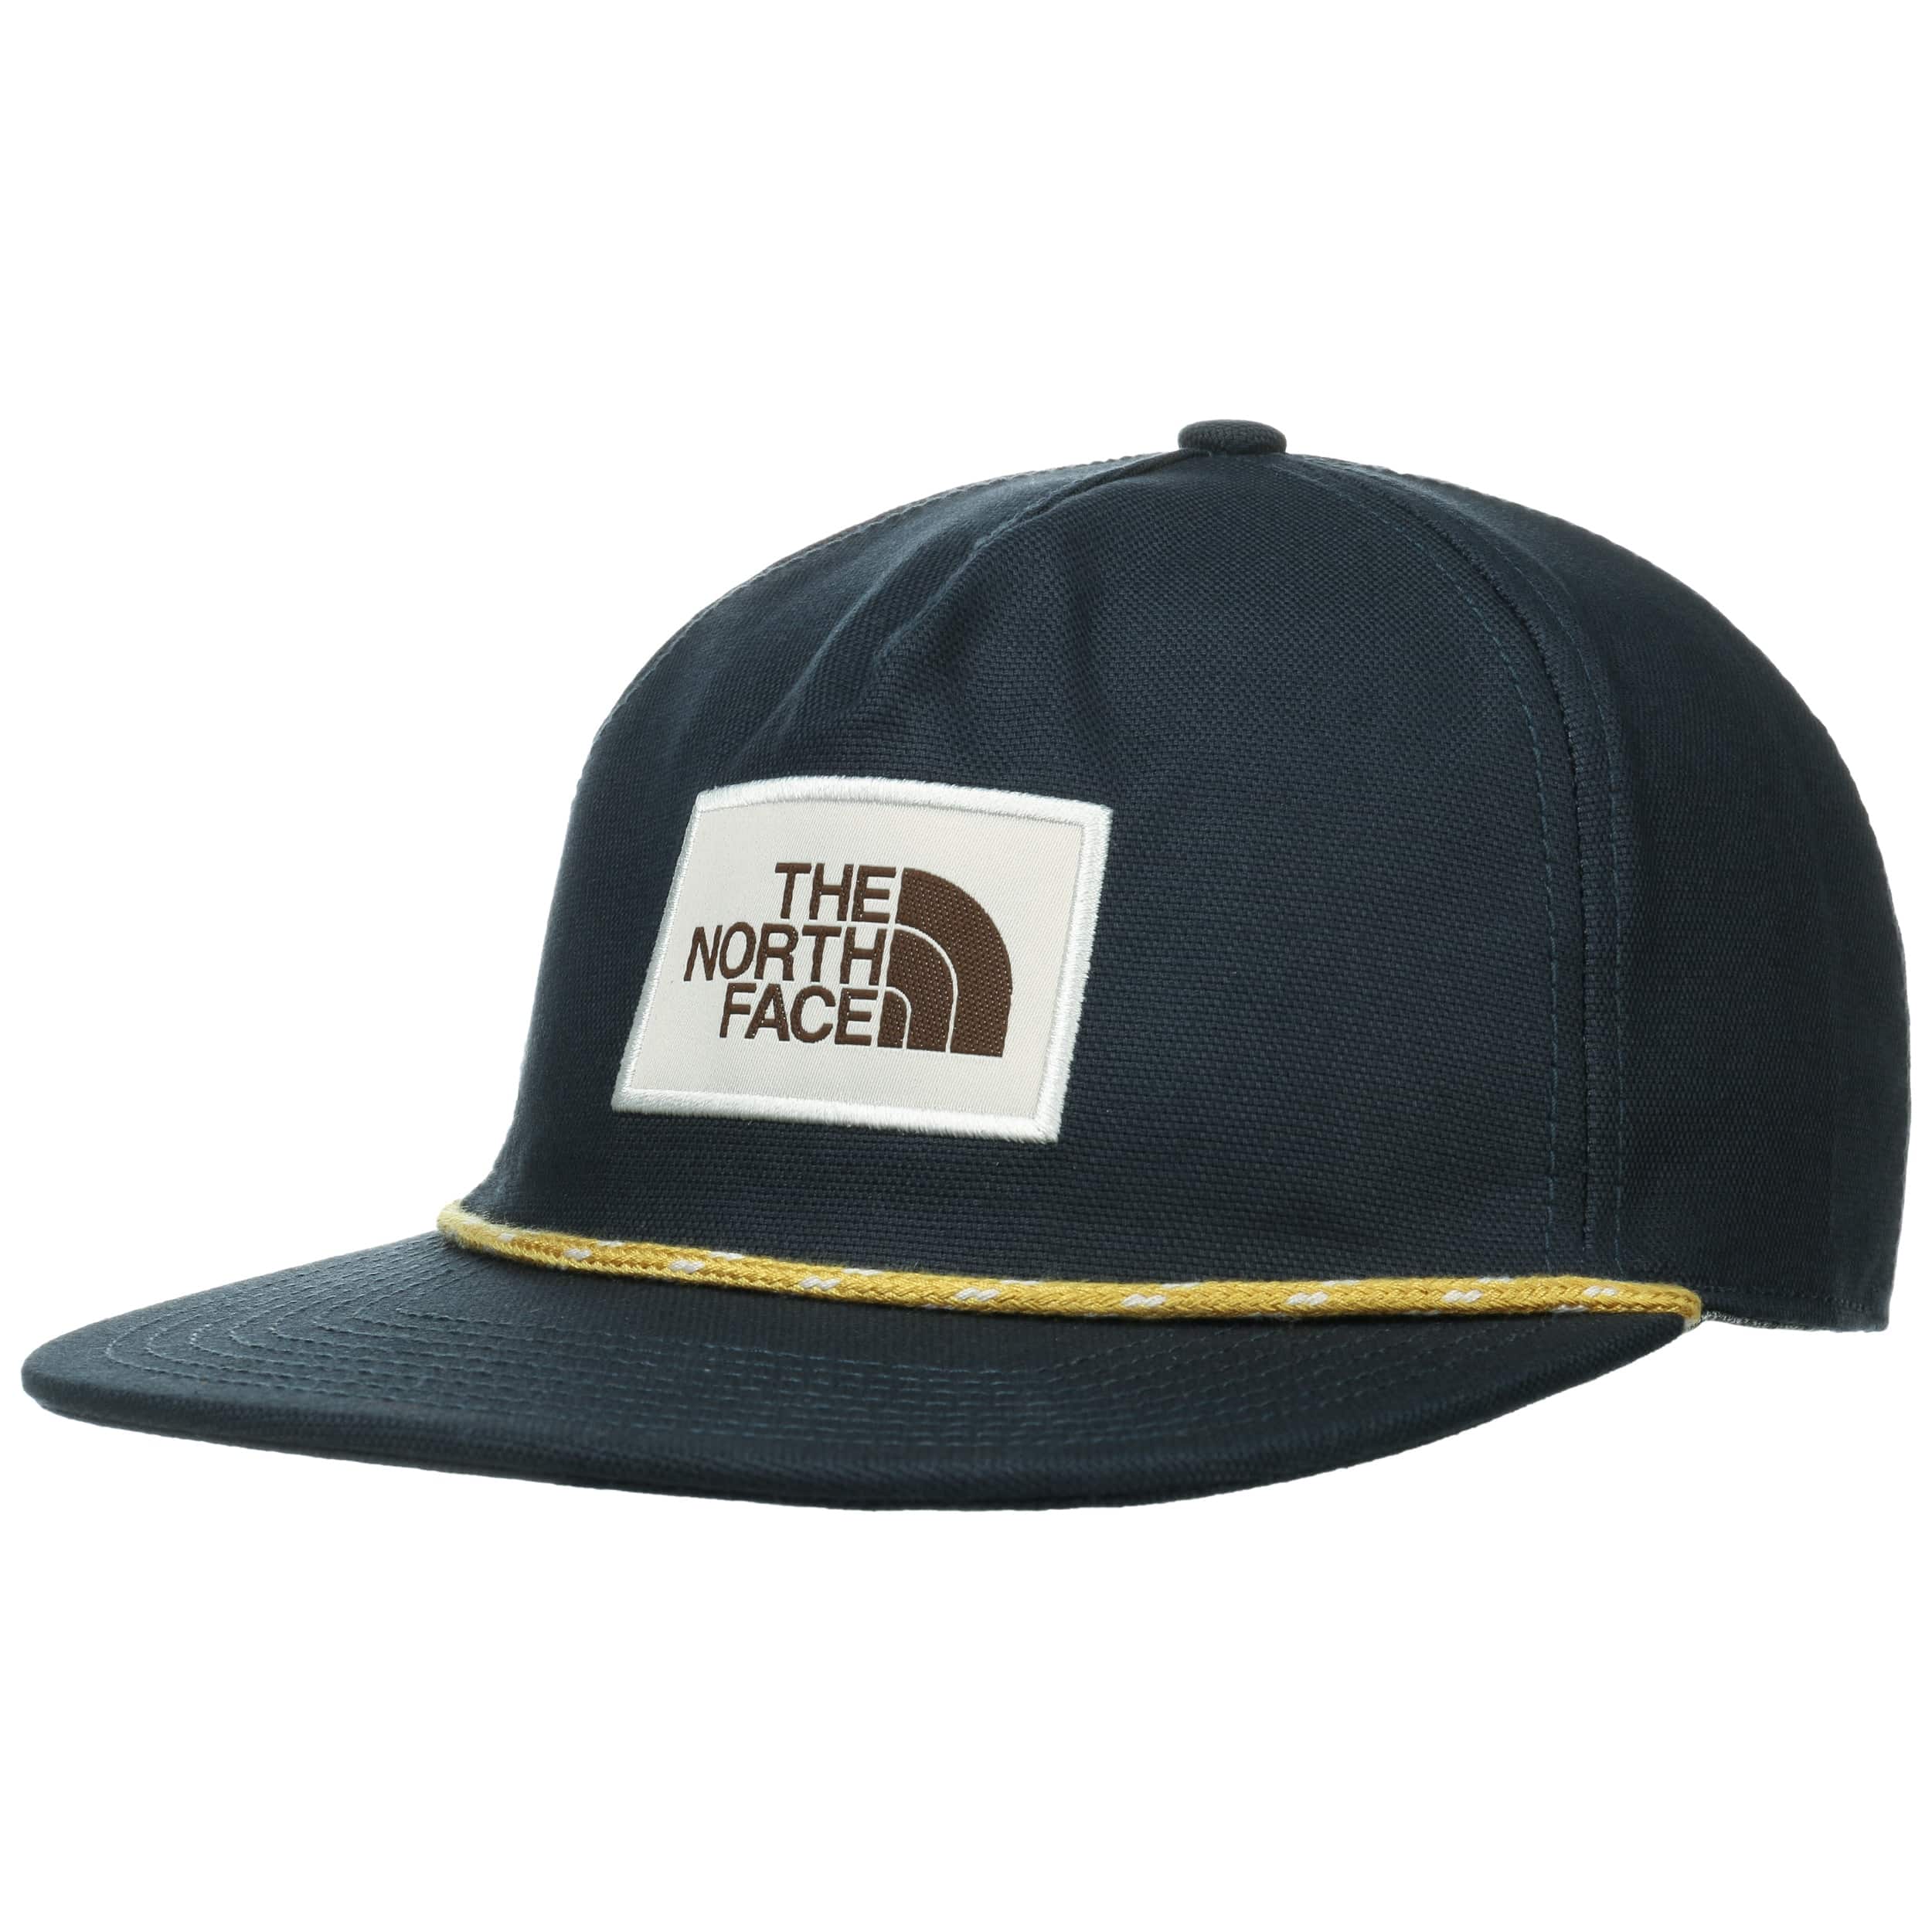 Corded Flat Brim Cap by The North Face 